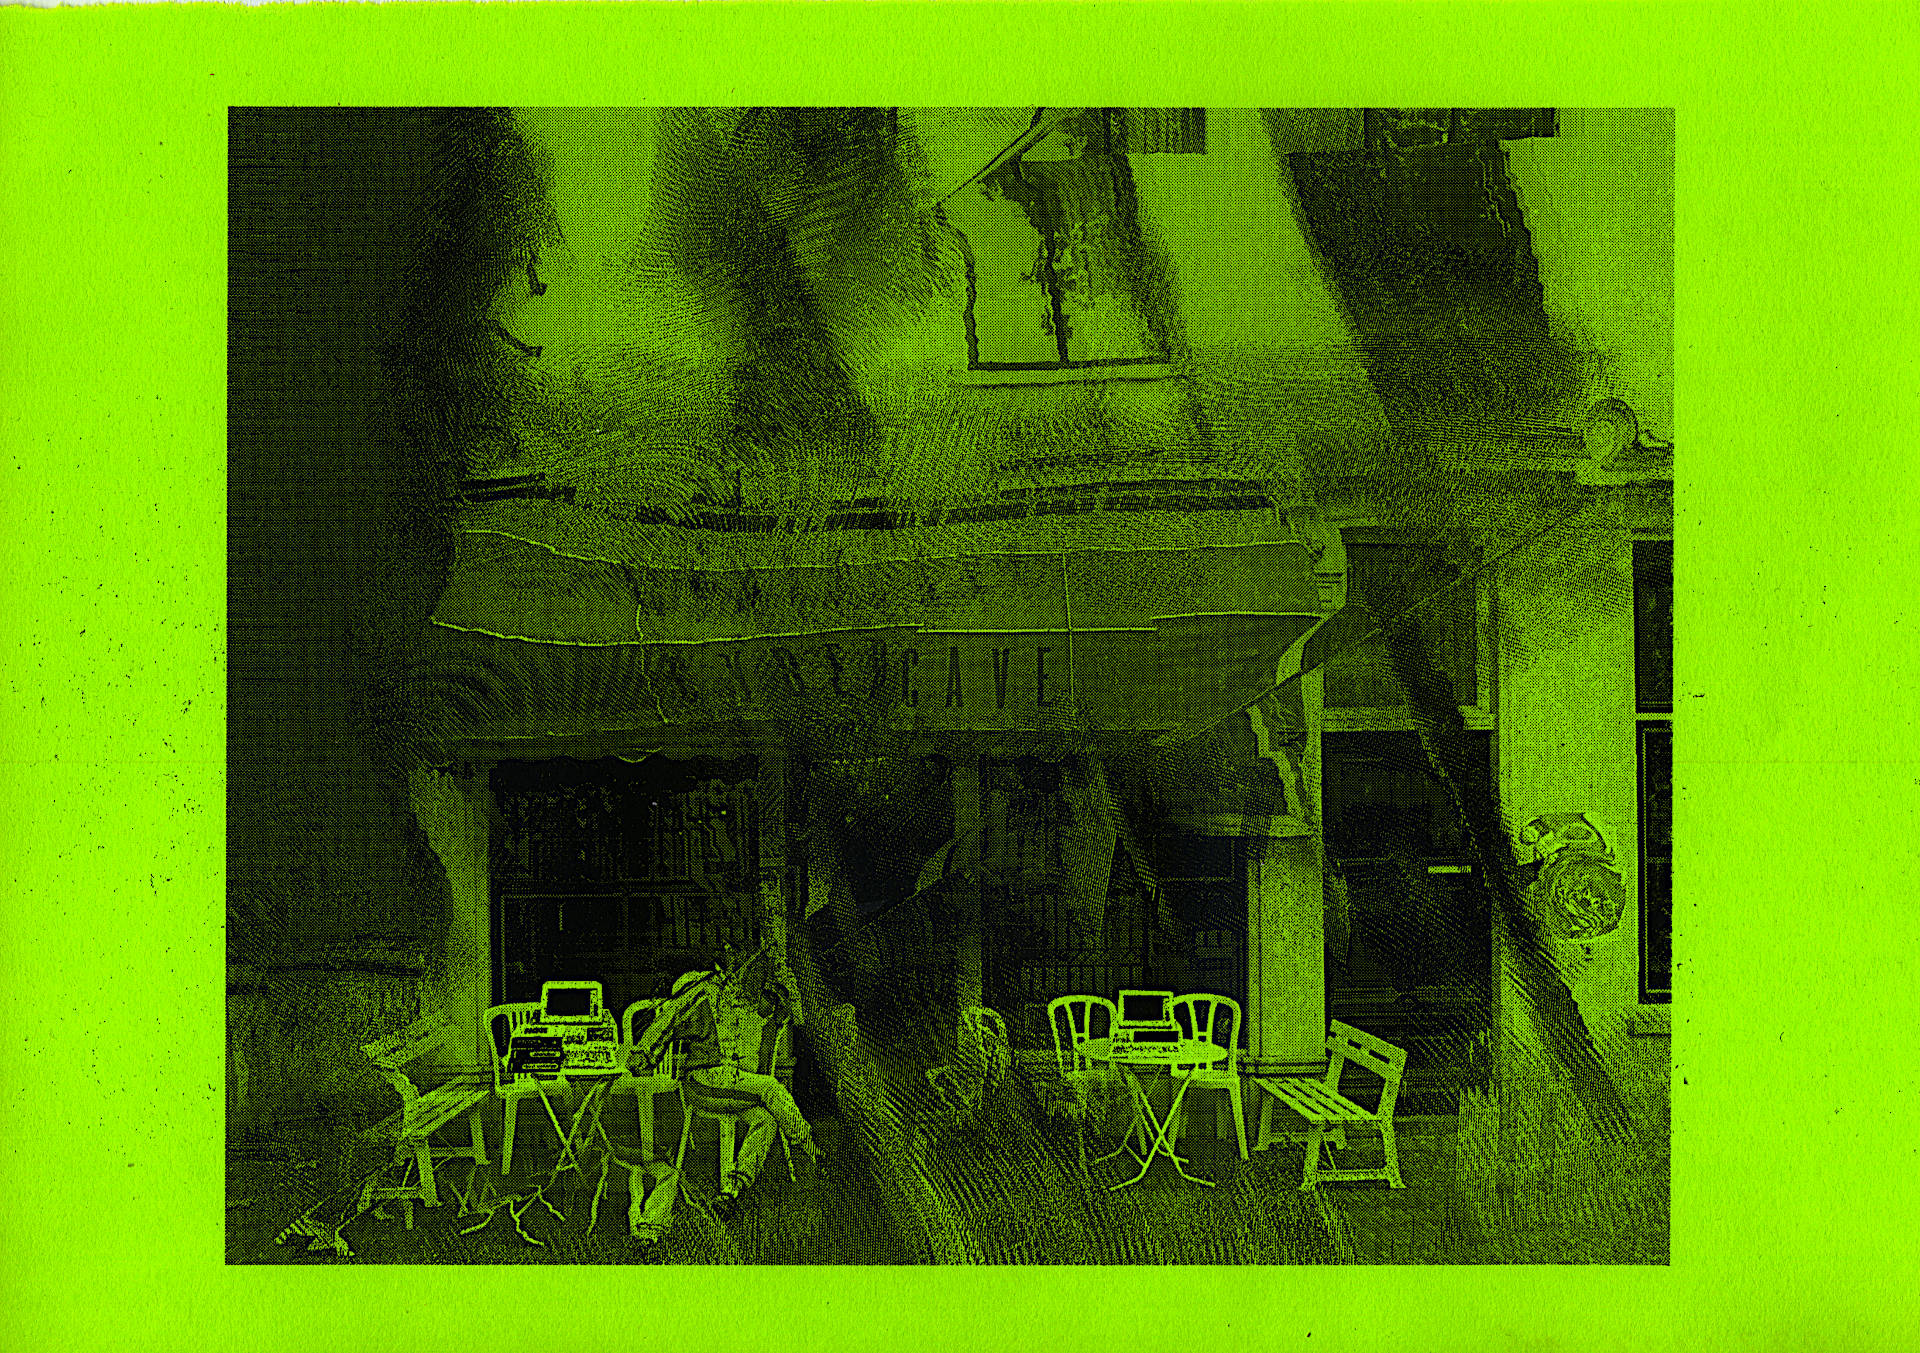 black laser print on green neon paper. A person wearing a training suit is sitting in a plastic chair outside a cafe. The cafe name CYBERCAVE is written on its marquise. Old desktop computers wait for more visitors on the tables outside.